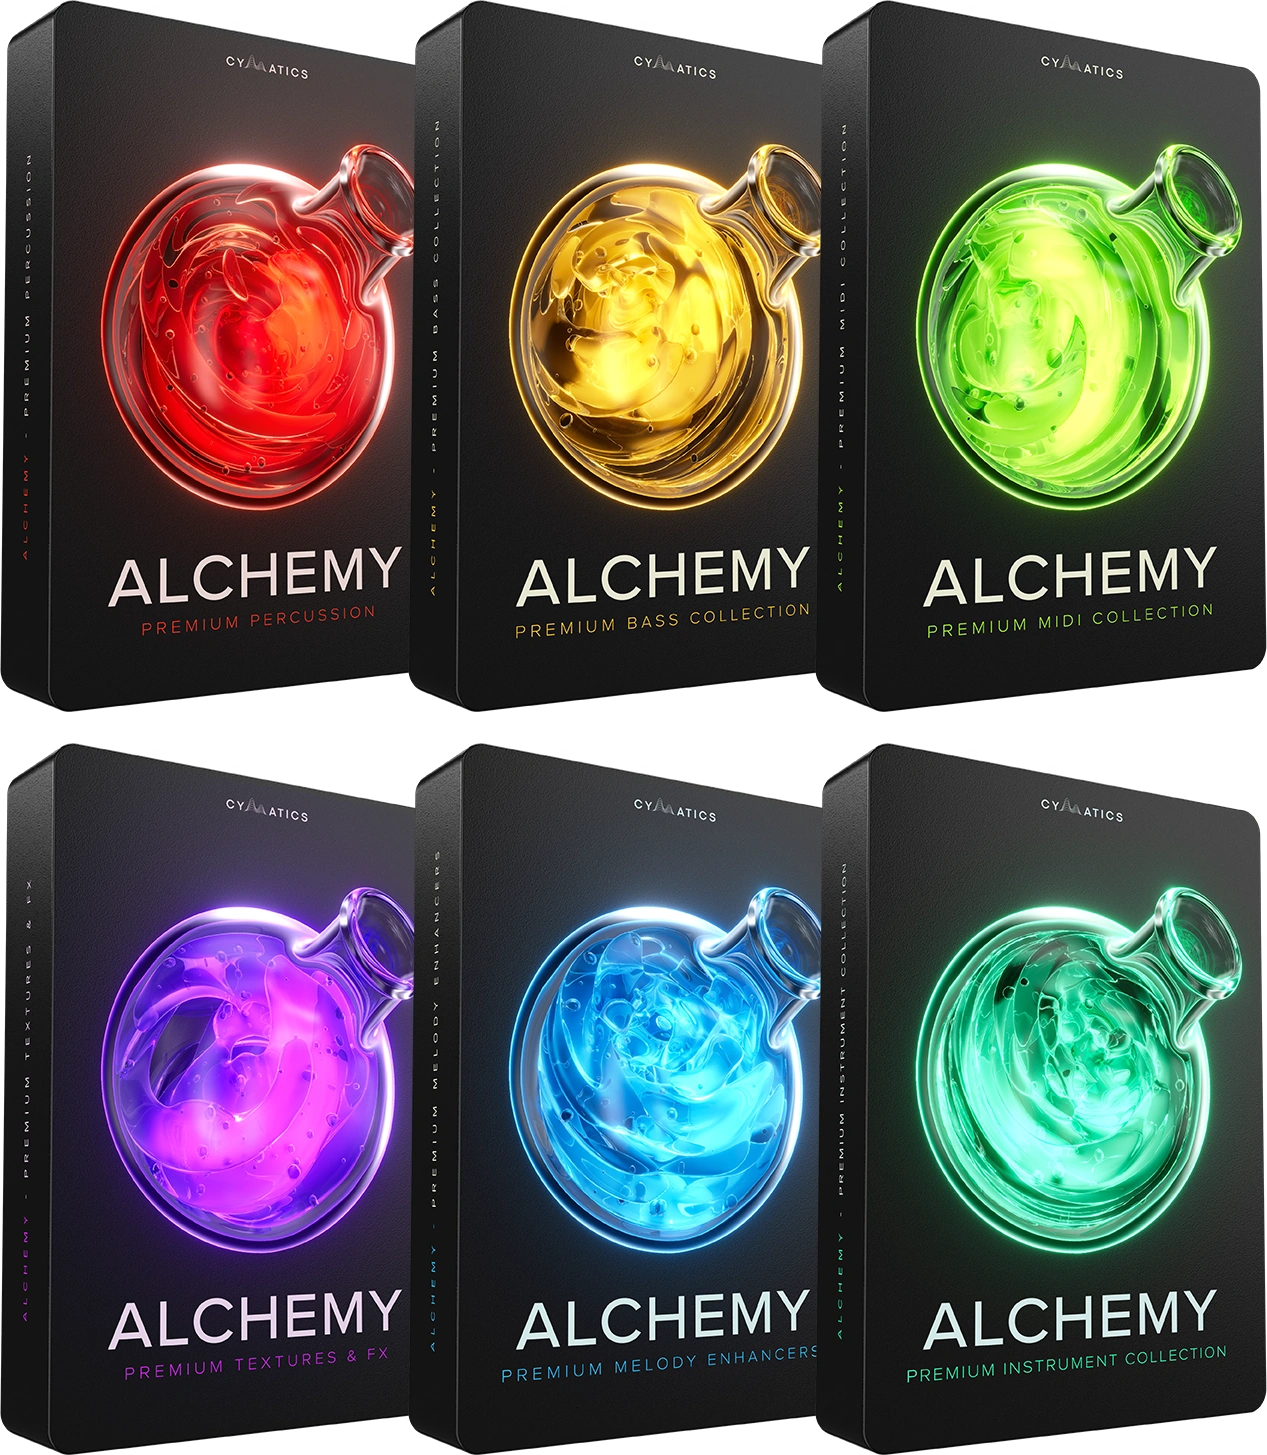 Alchemy Collection Mobile